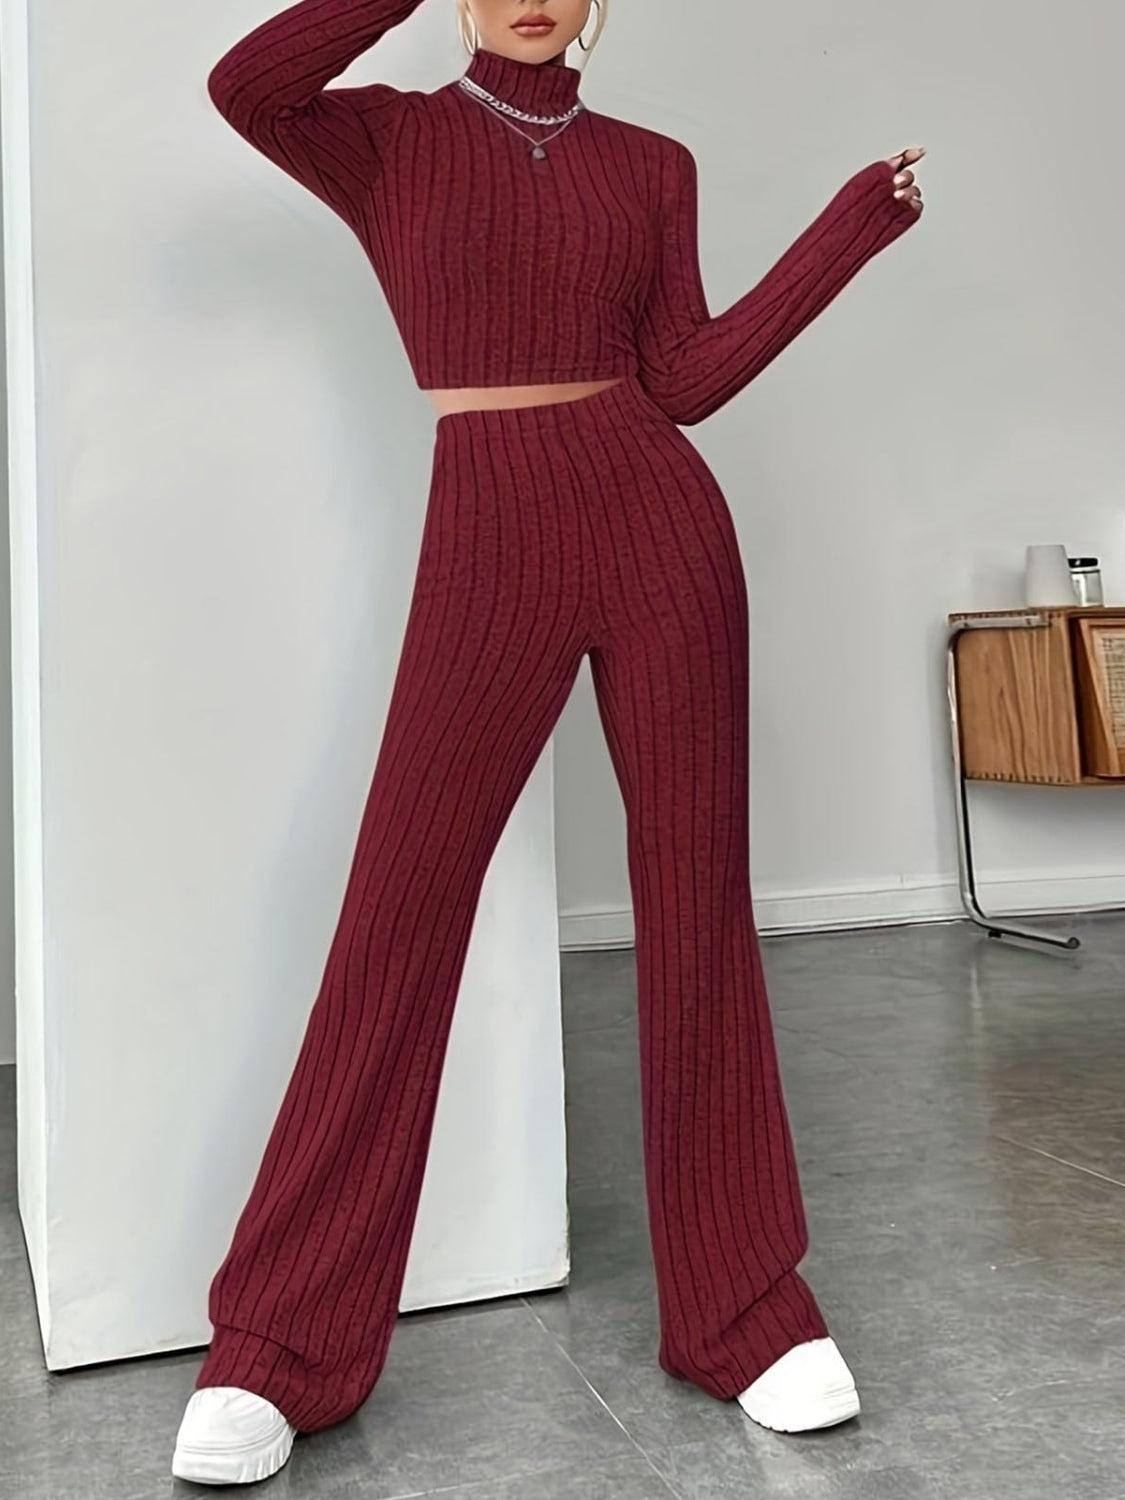 a woman in a red sweater and pants